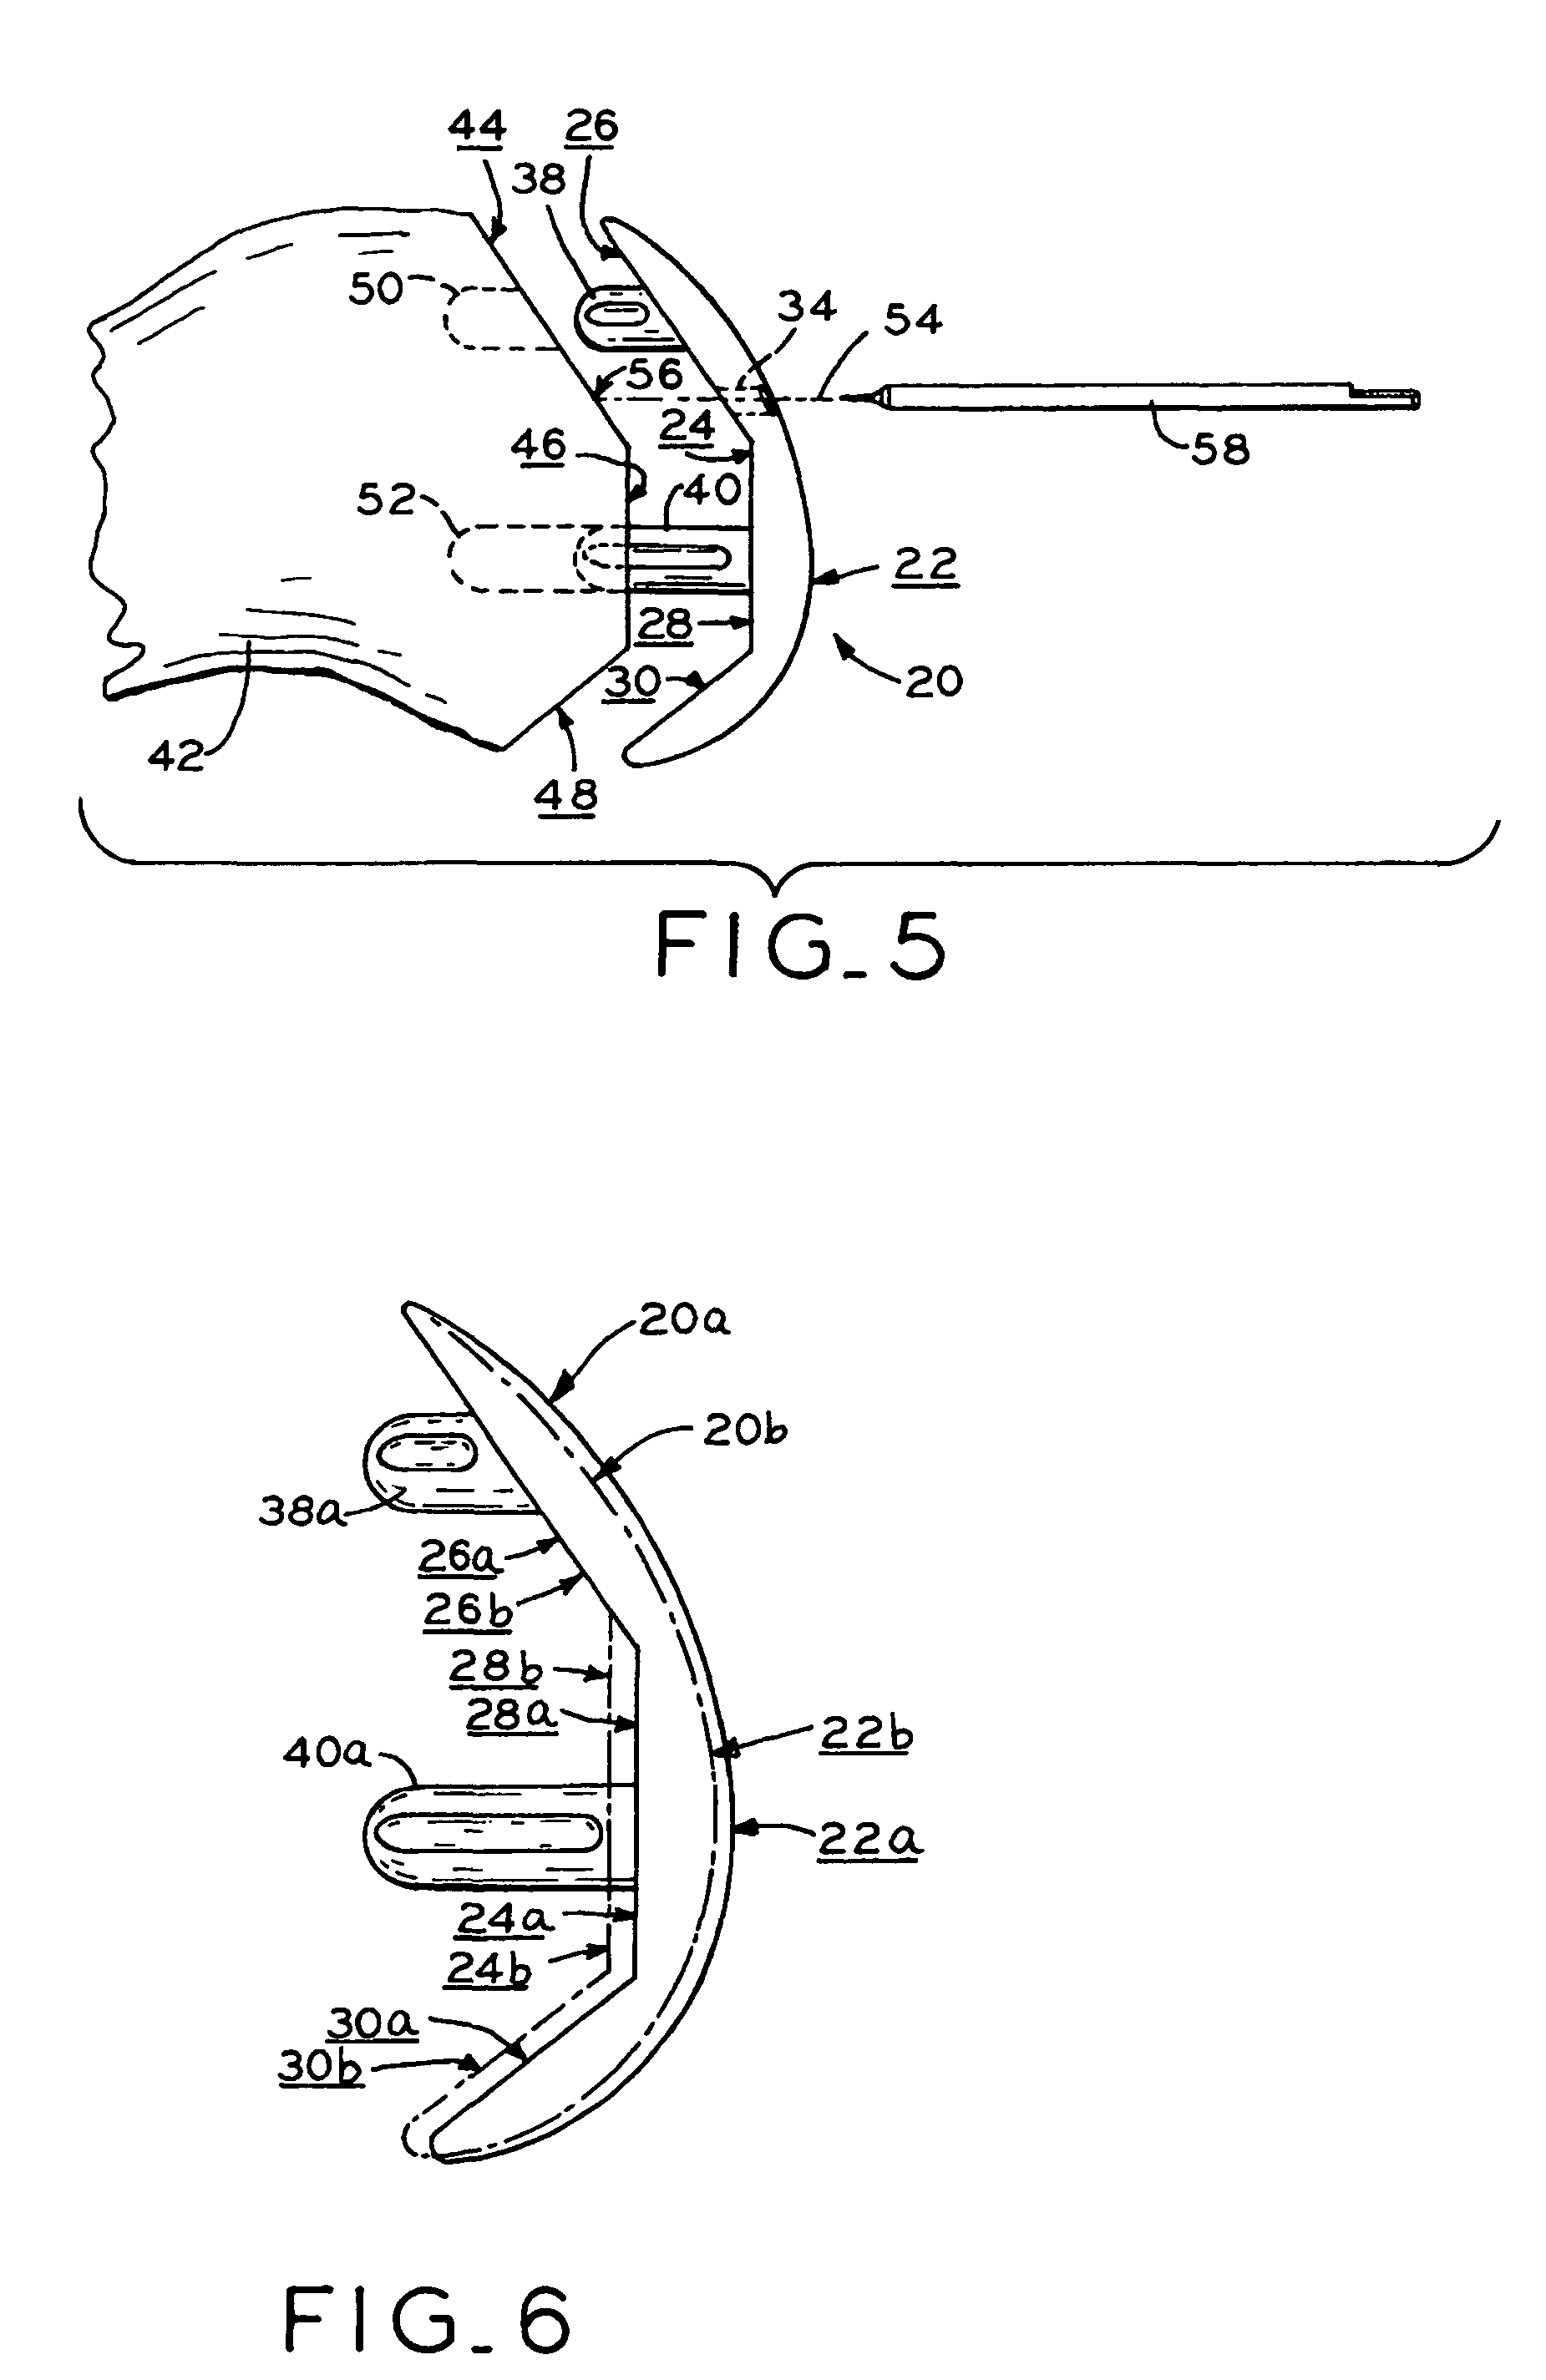 Provisional orthopedic implant and recutting instrument guide